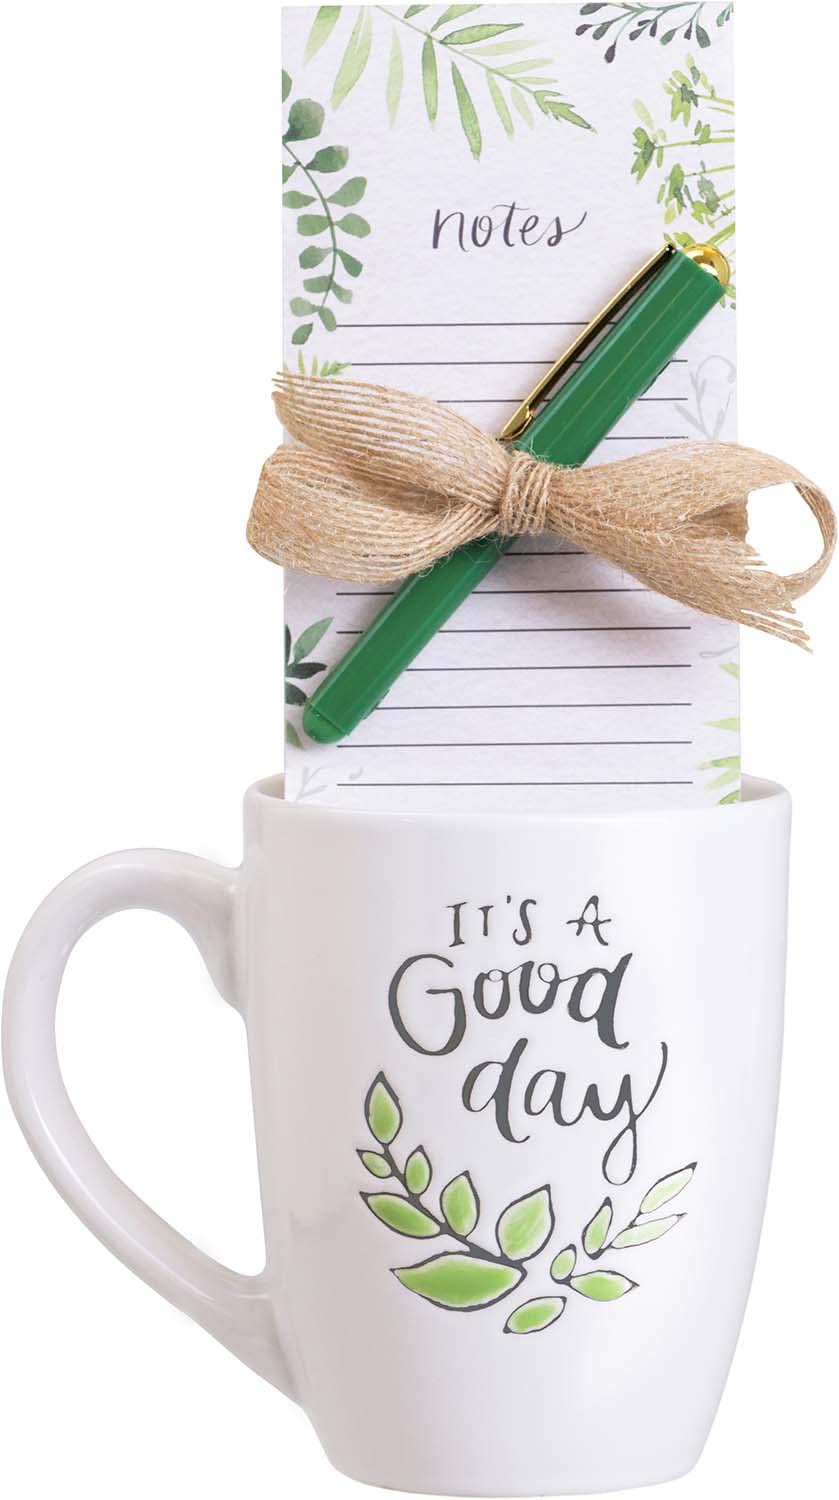 Eccolo_Its_A_Good_Day_Ceramic_Coffee_Mug_with_Notepad_and_Pen_Gift_Set